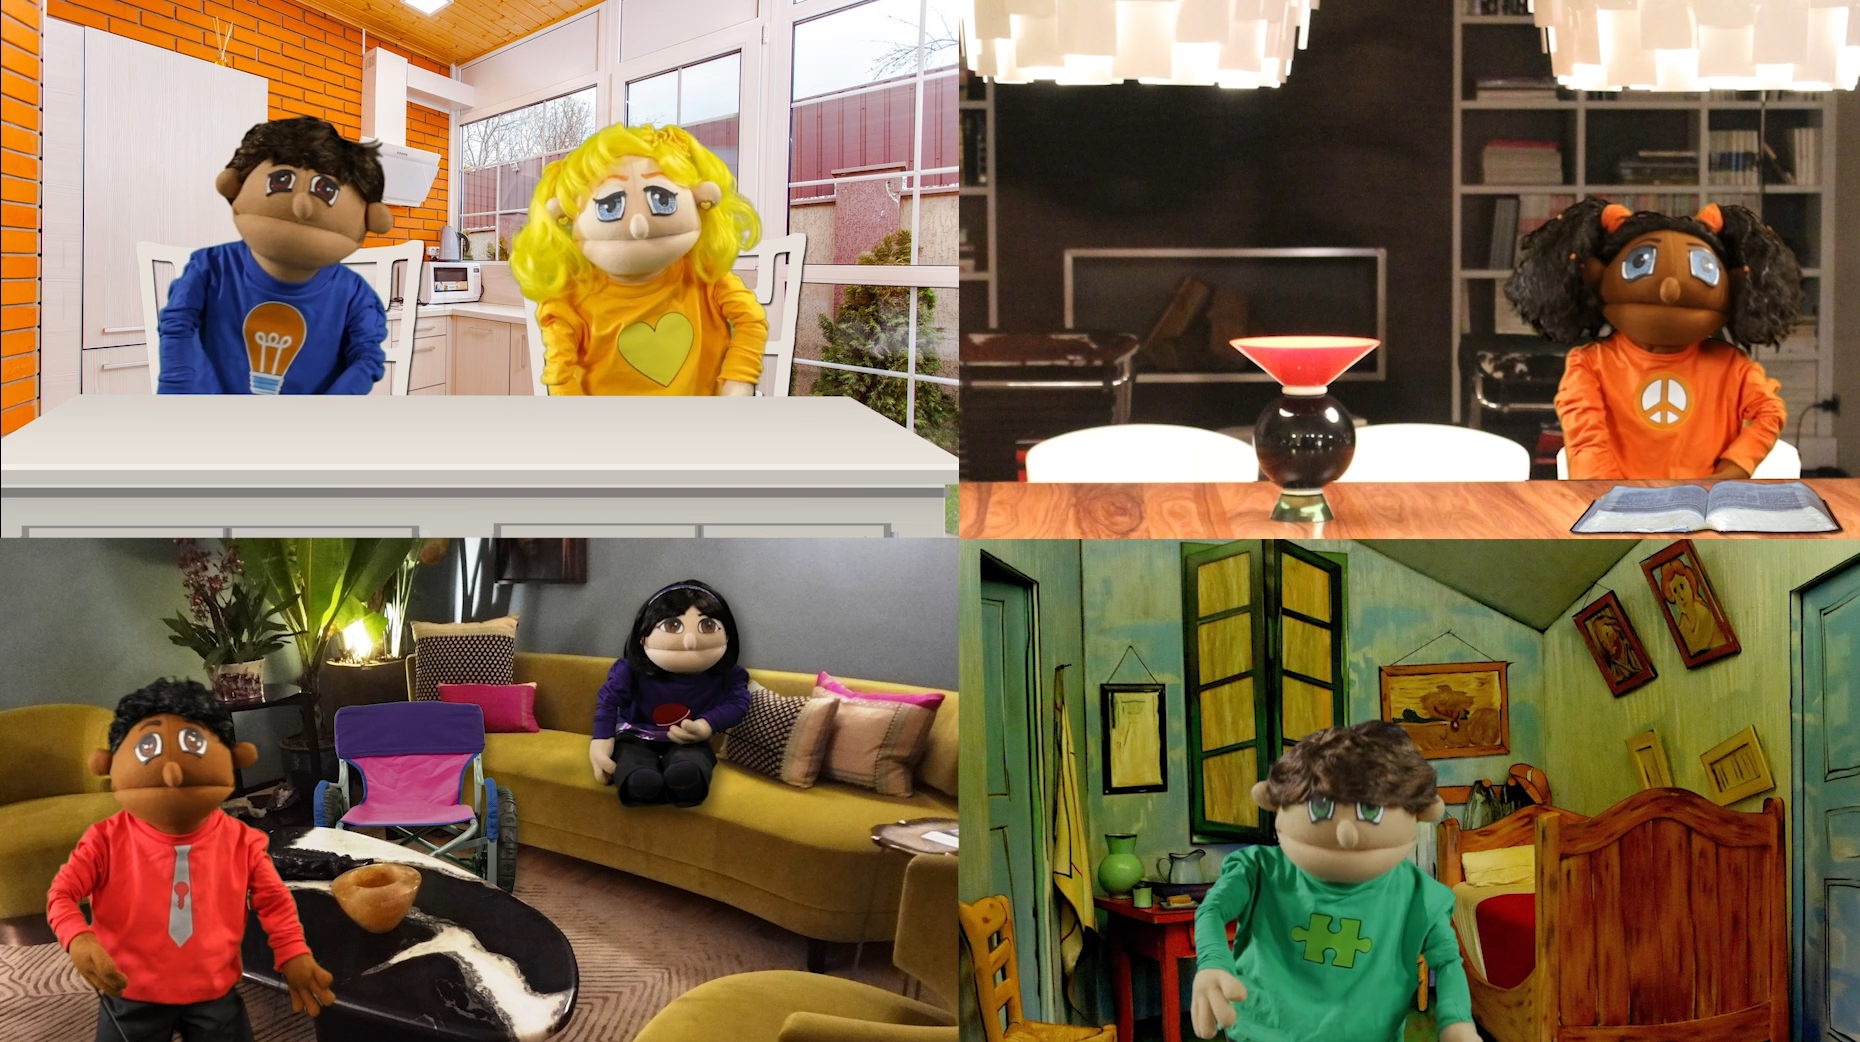 Four images of puppets in different locations.